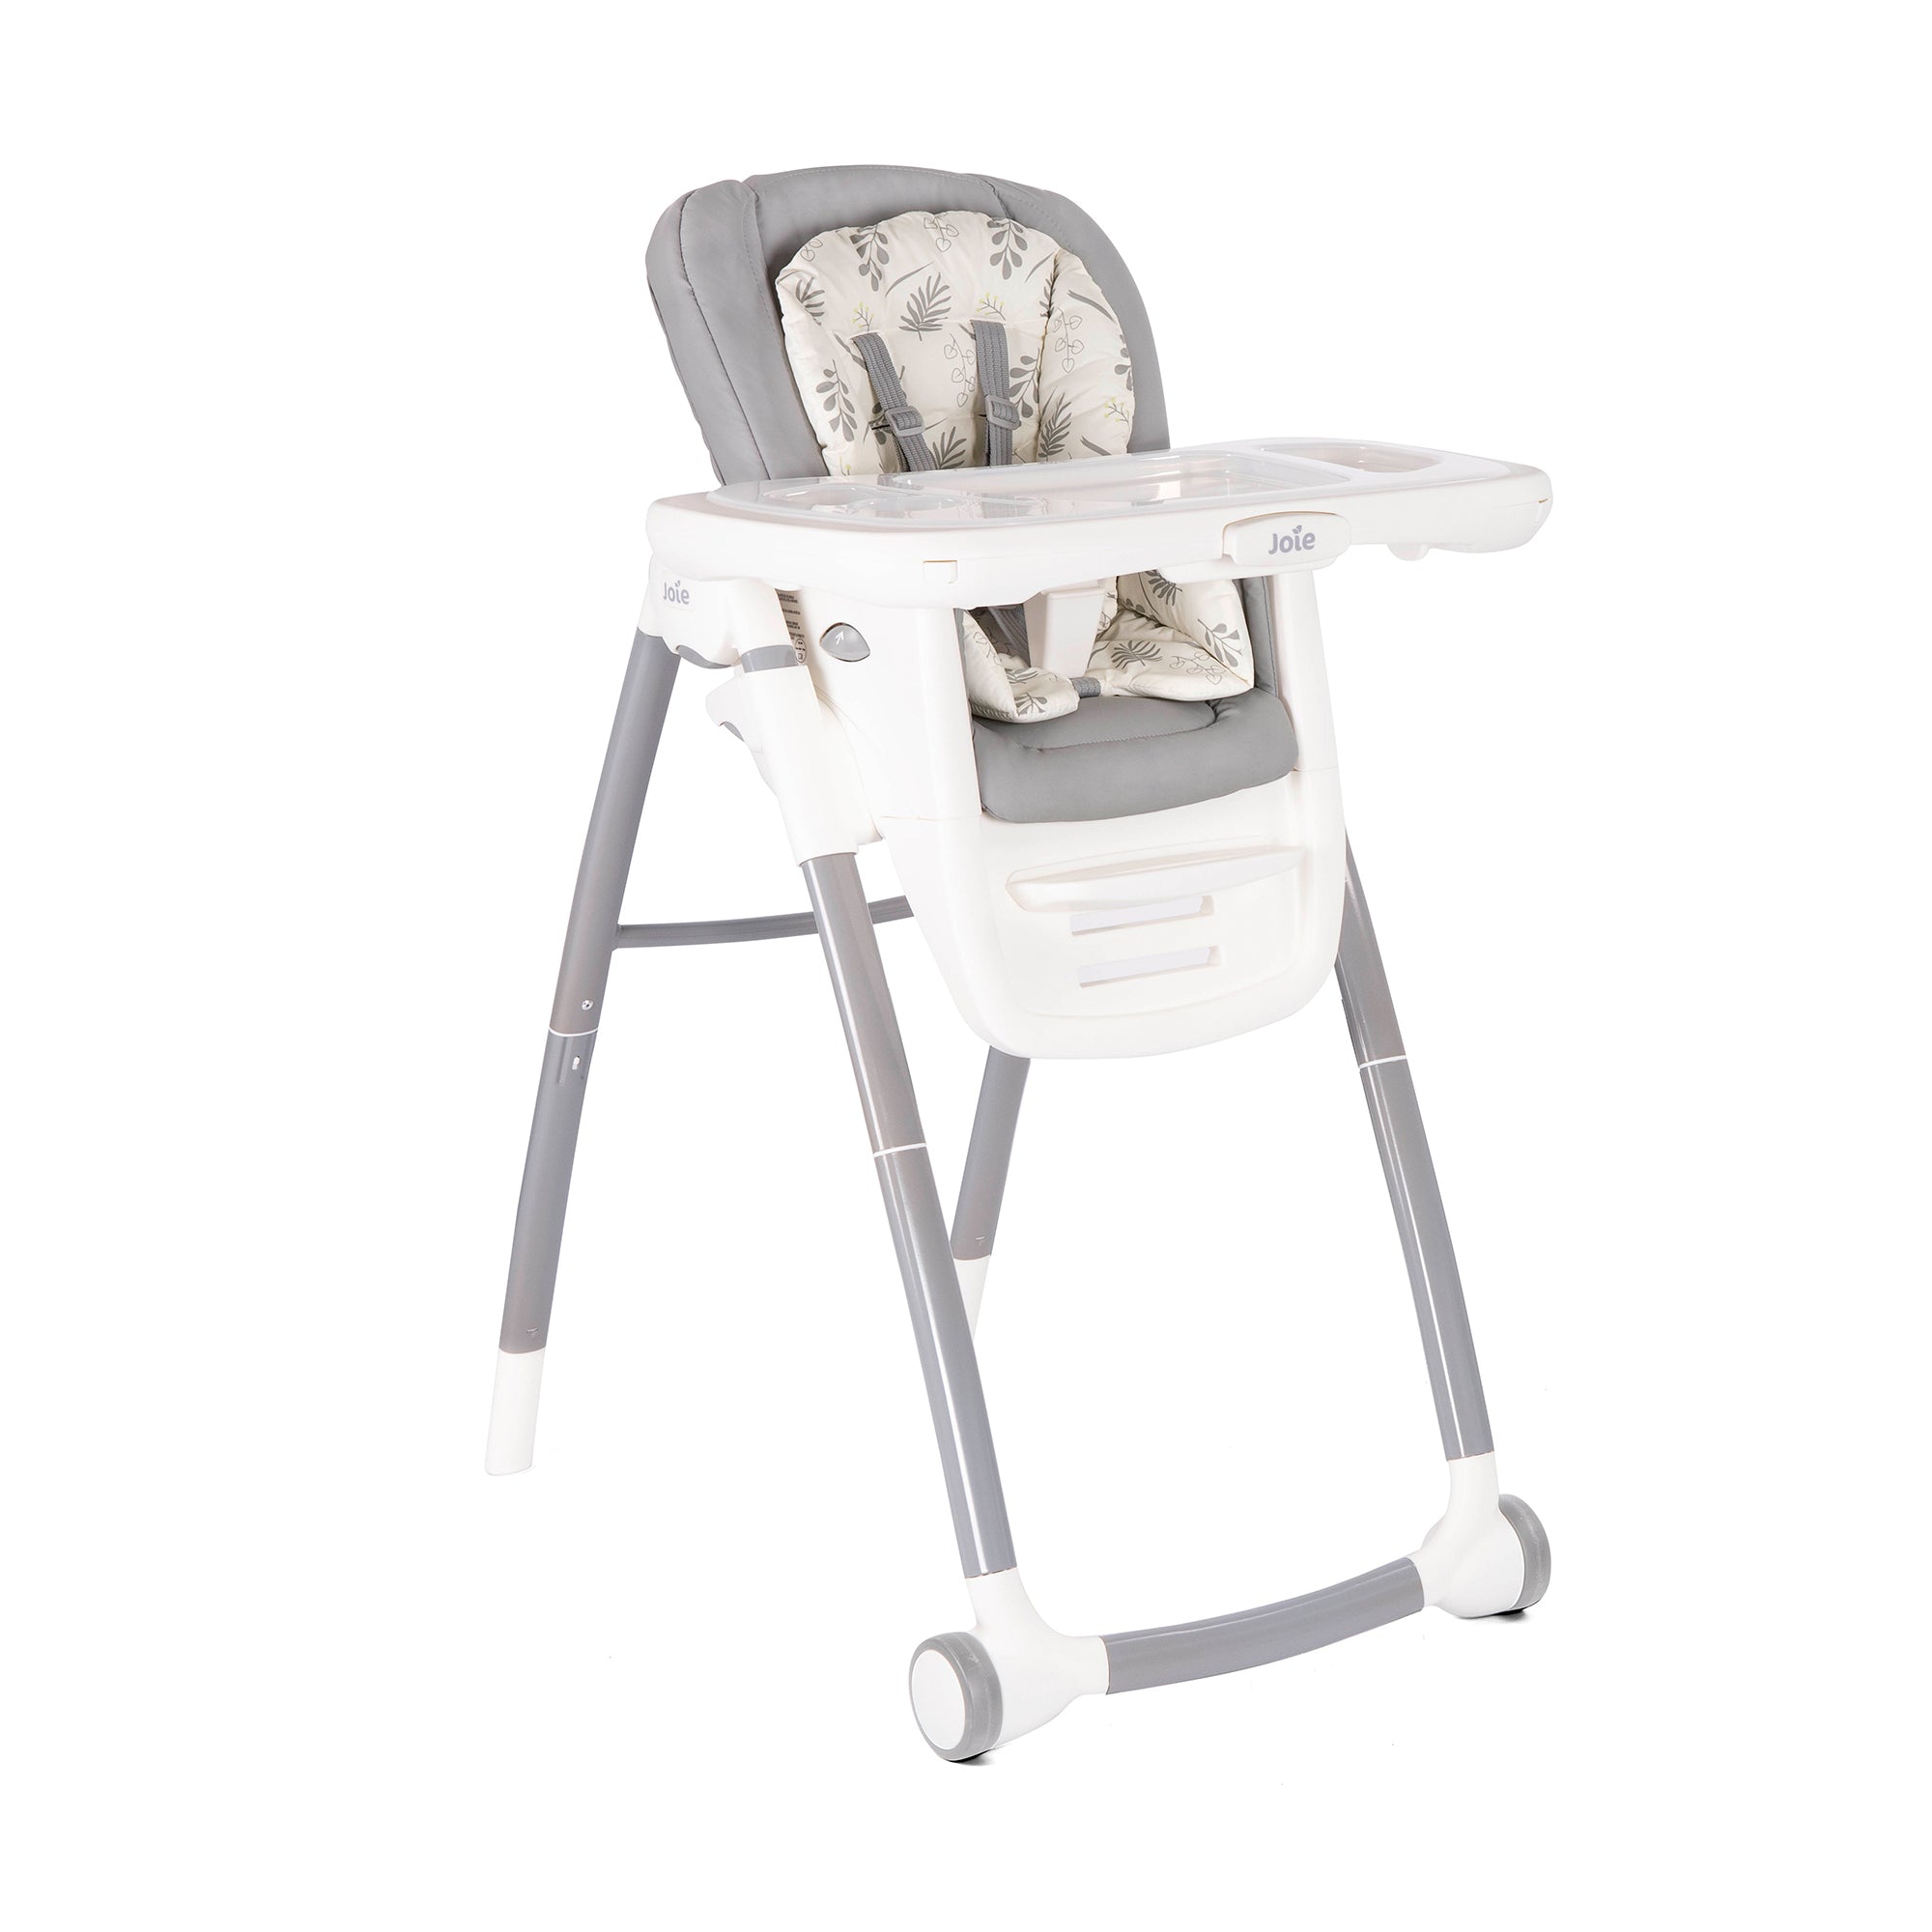 Joie High Chair Multiply 6in1 (6 to 72 Months)